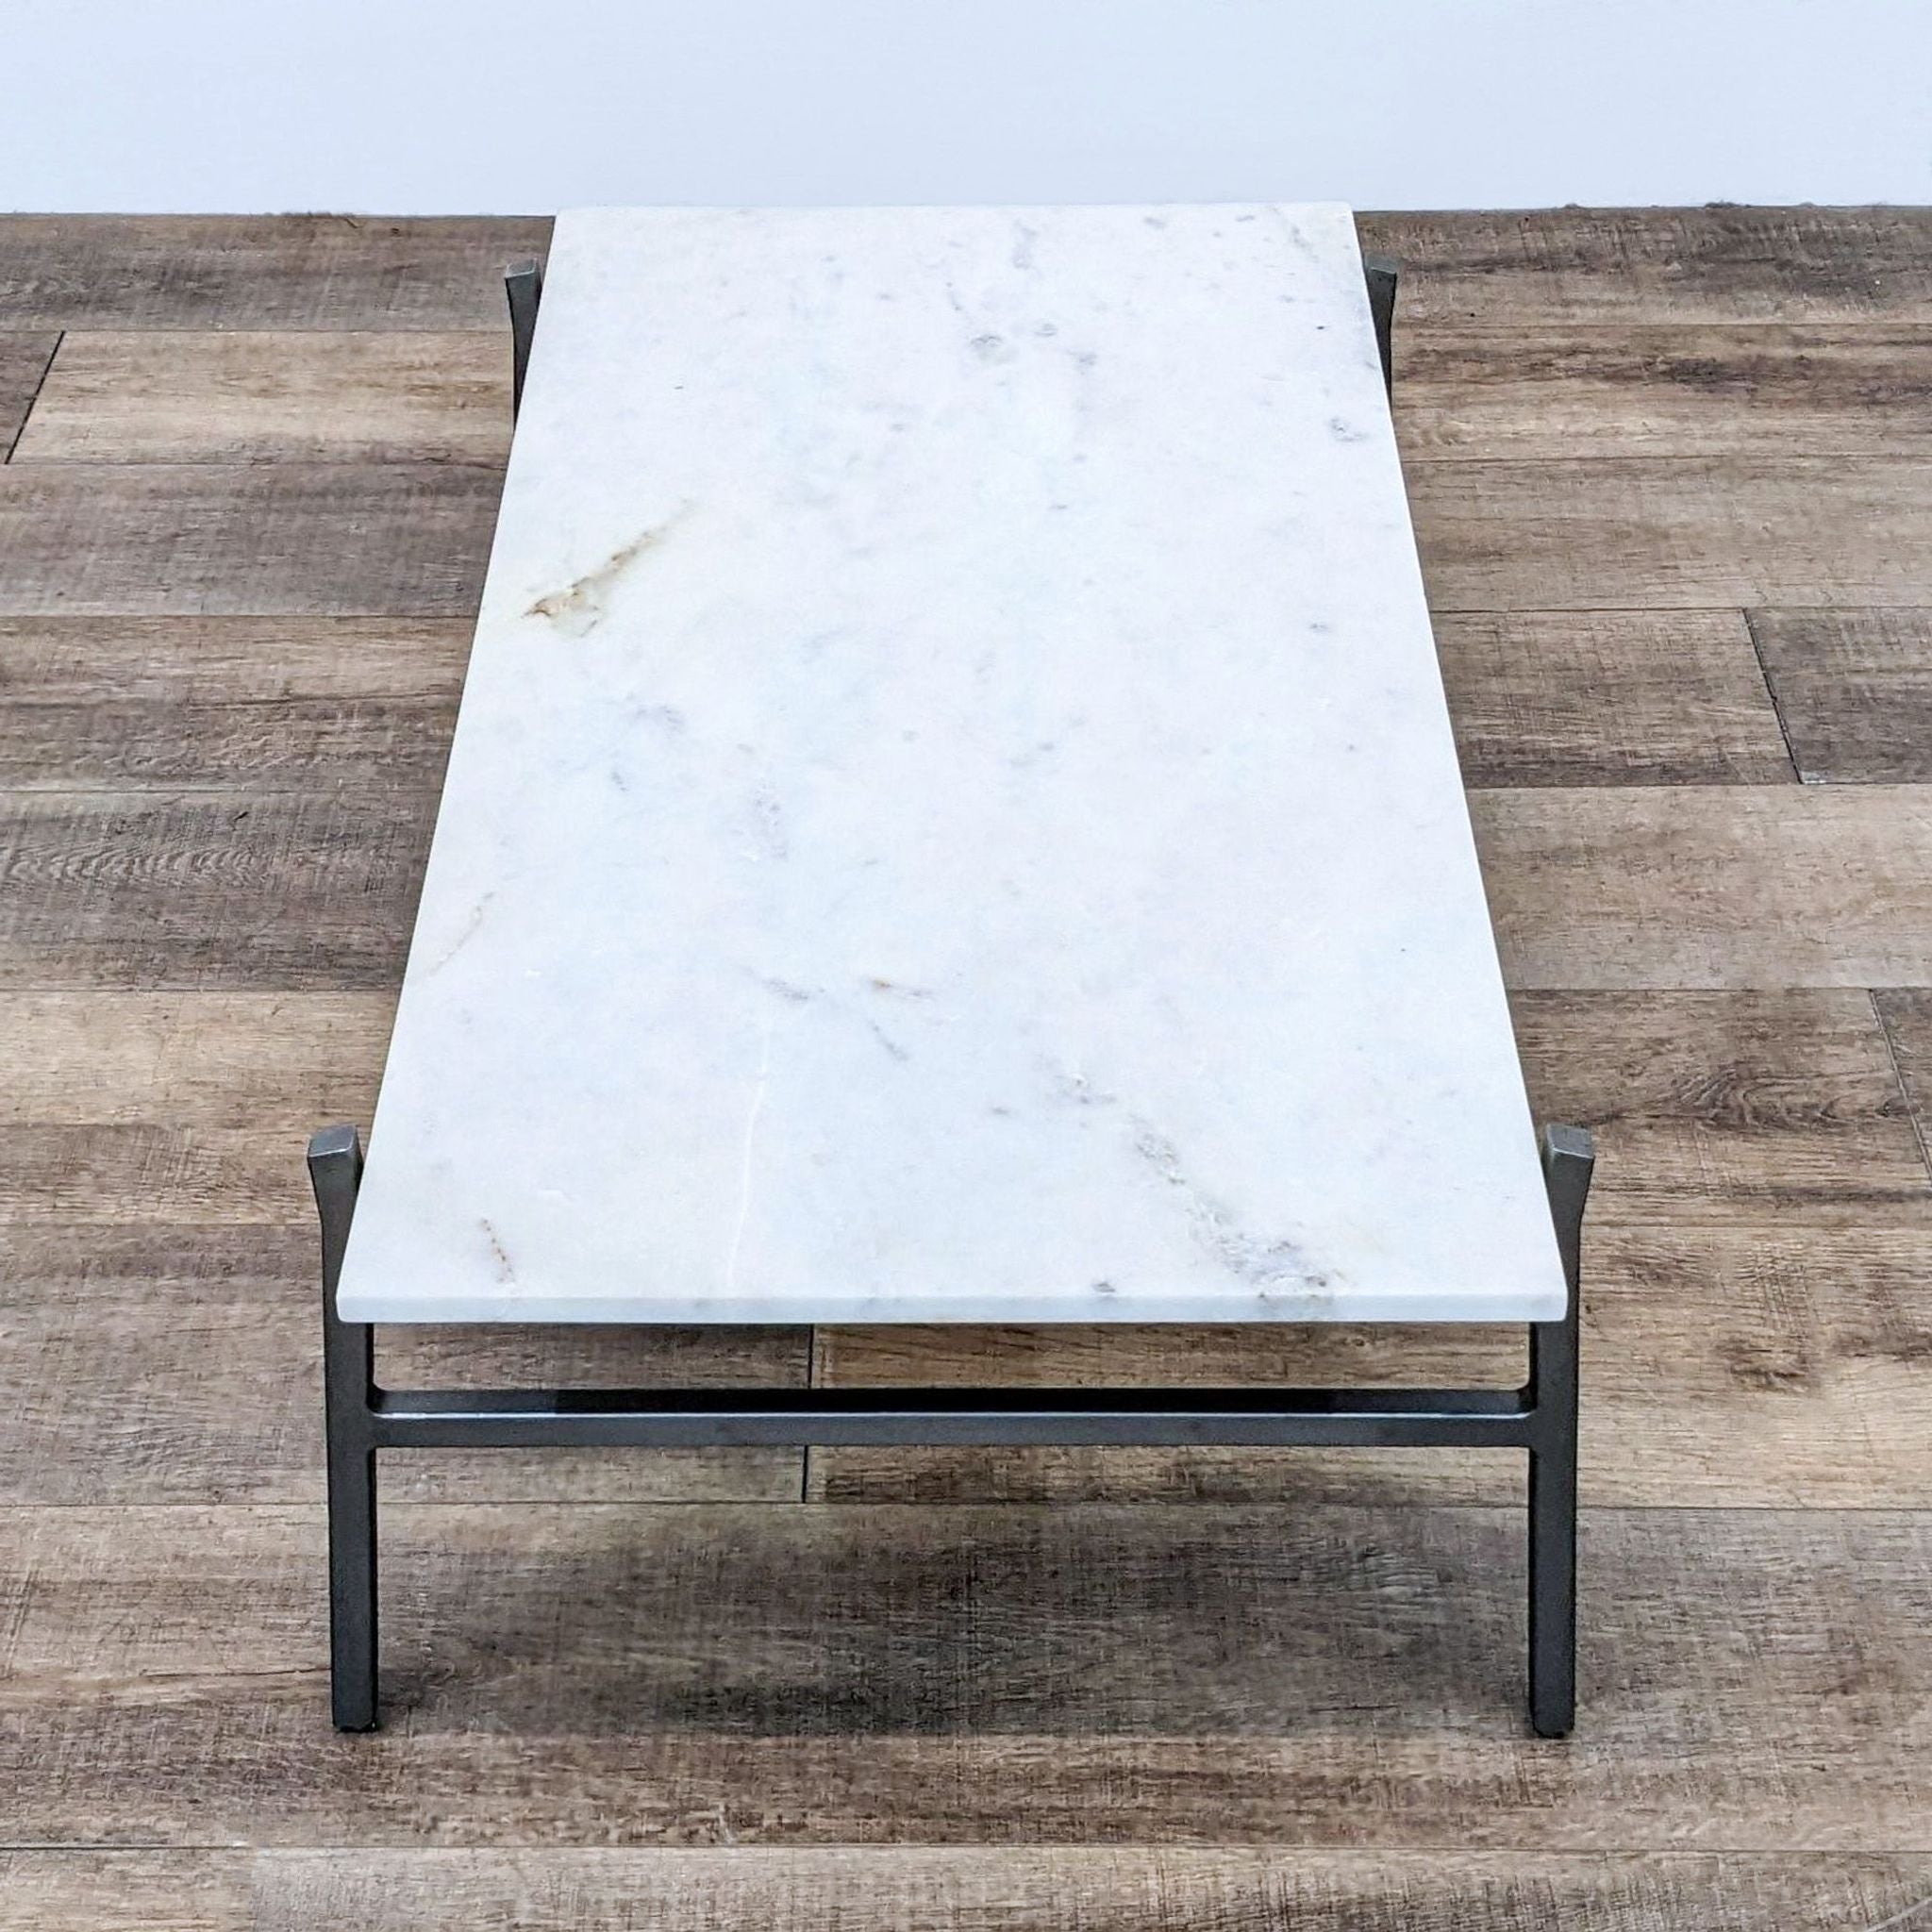 Rectangular marble top coffee table with a minimalist steel base by CB2, presented in a frontal view.